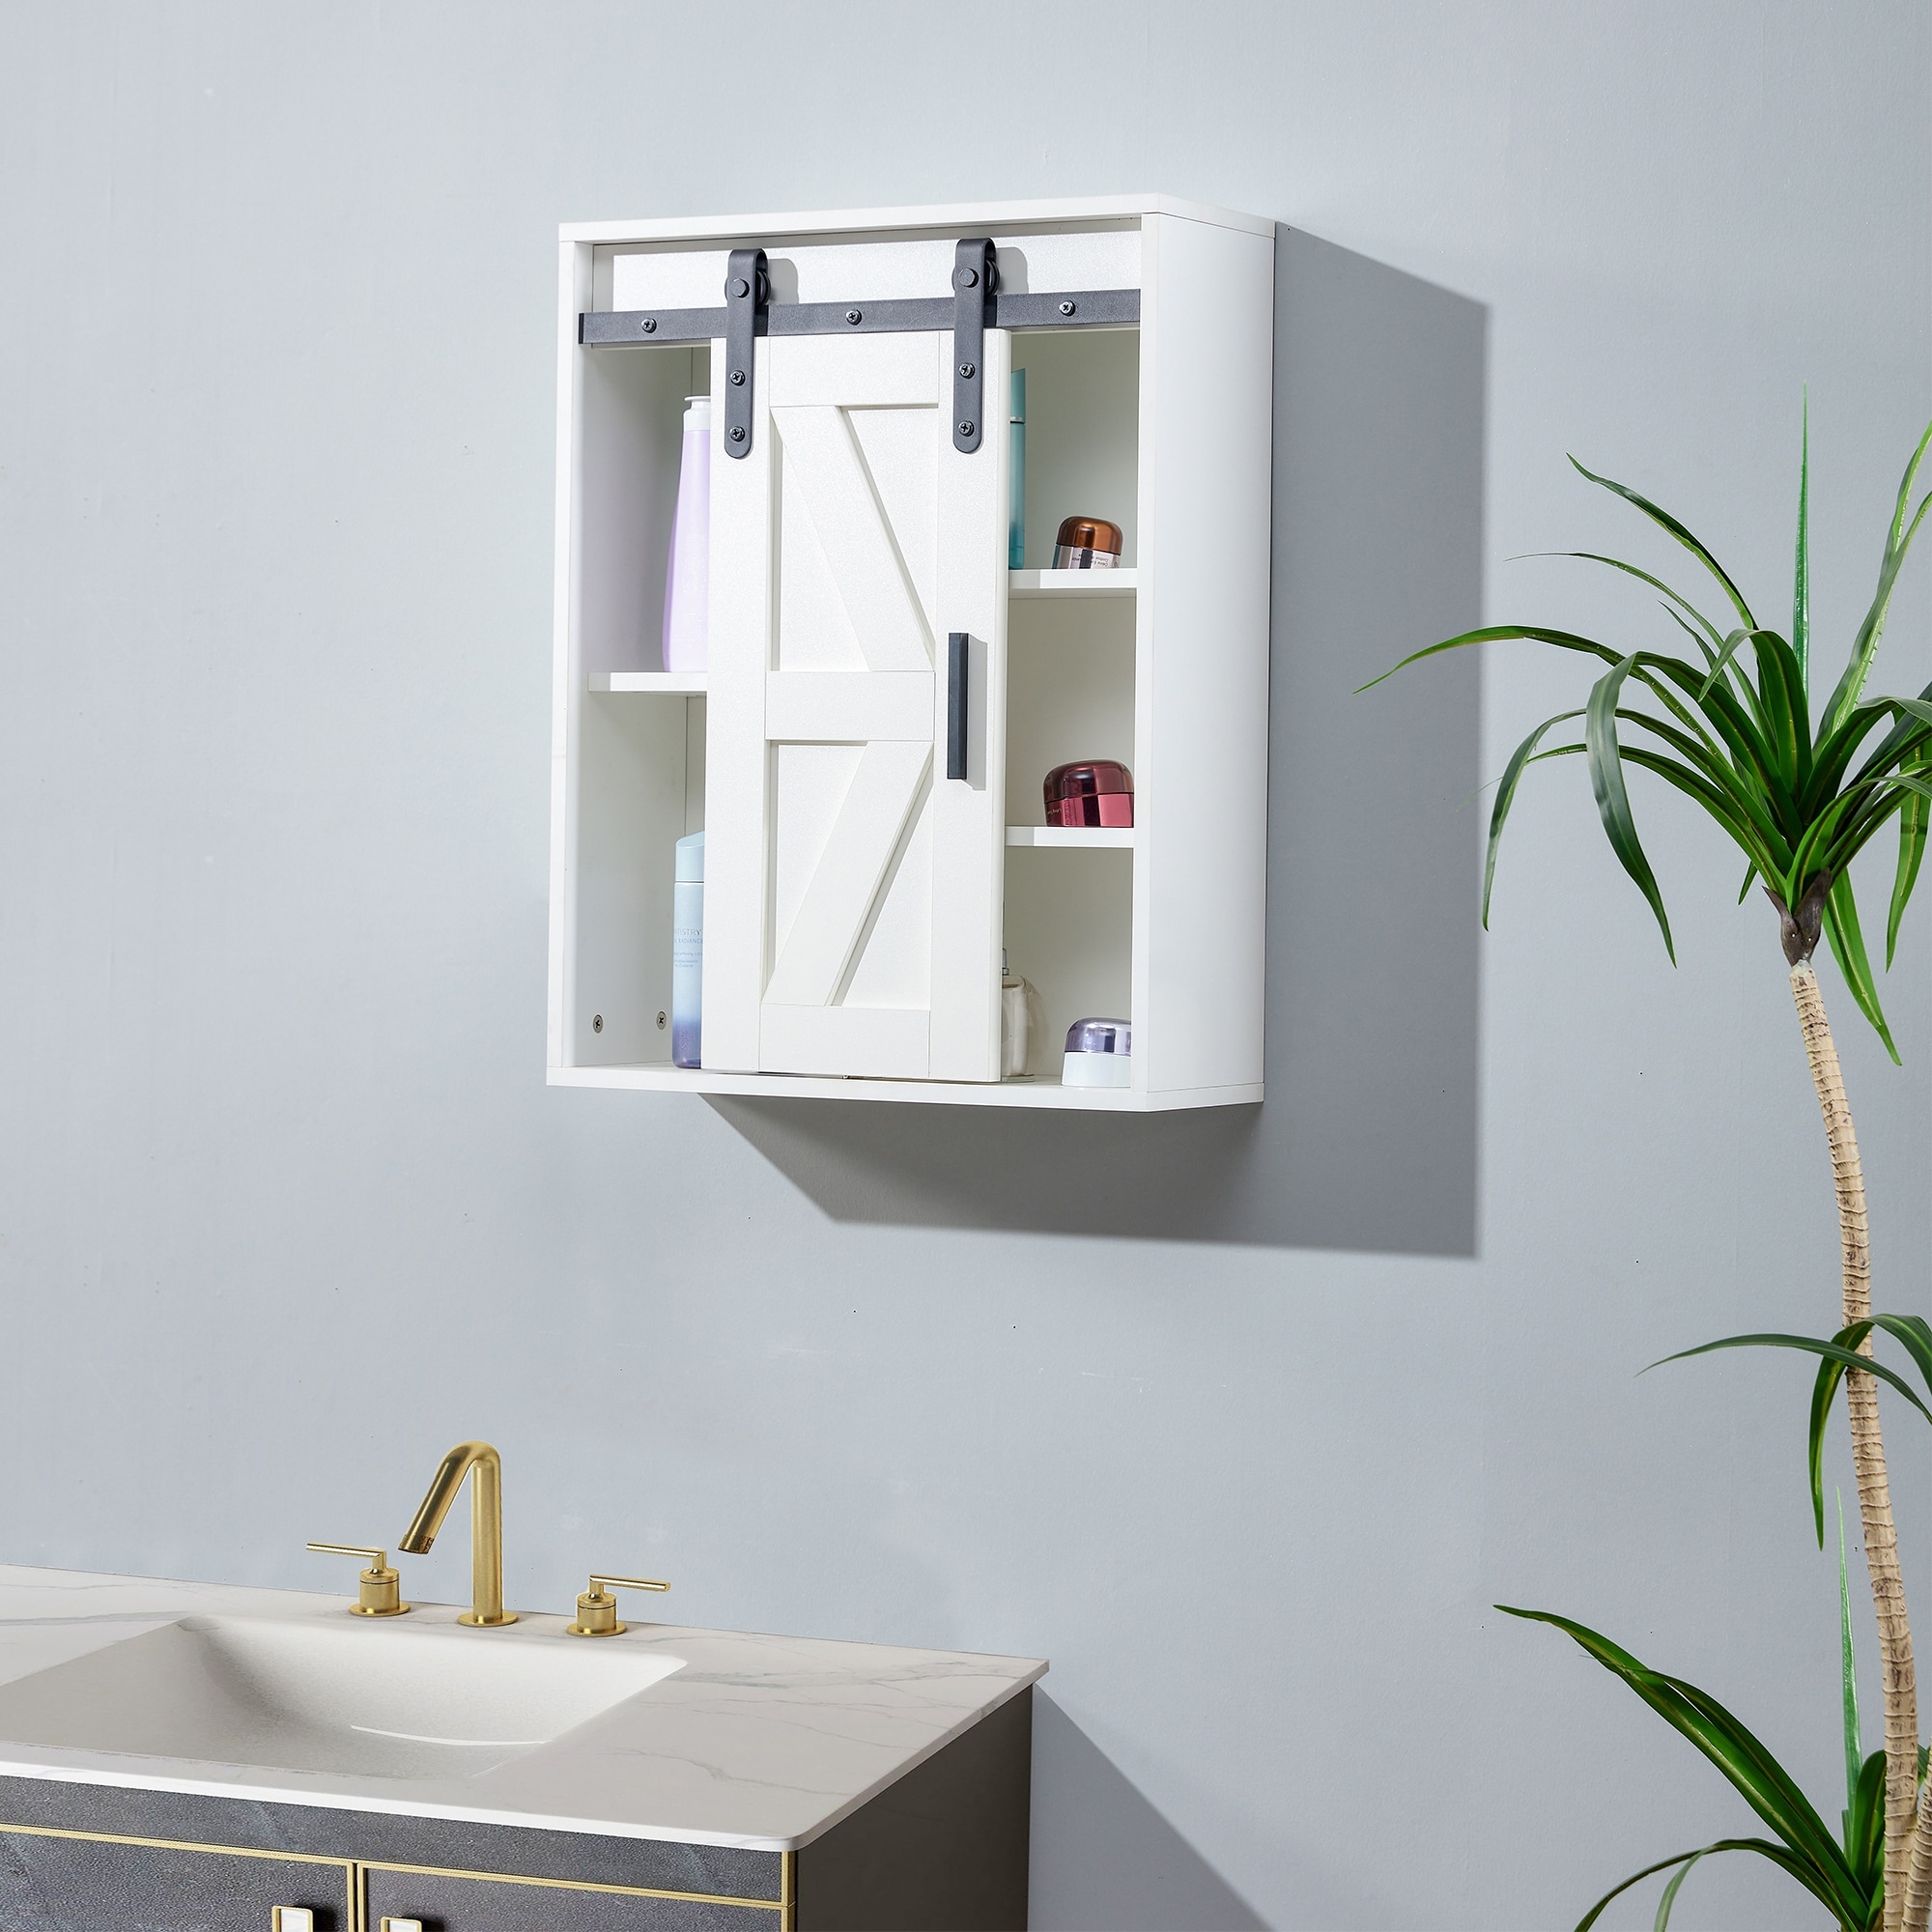 https://ak1.ostkcdn.com/images/products/is/images/direct/fda2fdc748aa9ab38a36e18391b3f250f70b30b1/Bathroom-Cabinet-Wall-Mounted-White-Medicine-Cabinet-with-Sliding-Barn-Door%2C-Over-The-Toilet-Storage-Cabinet-for-Livingroom.jpg